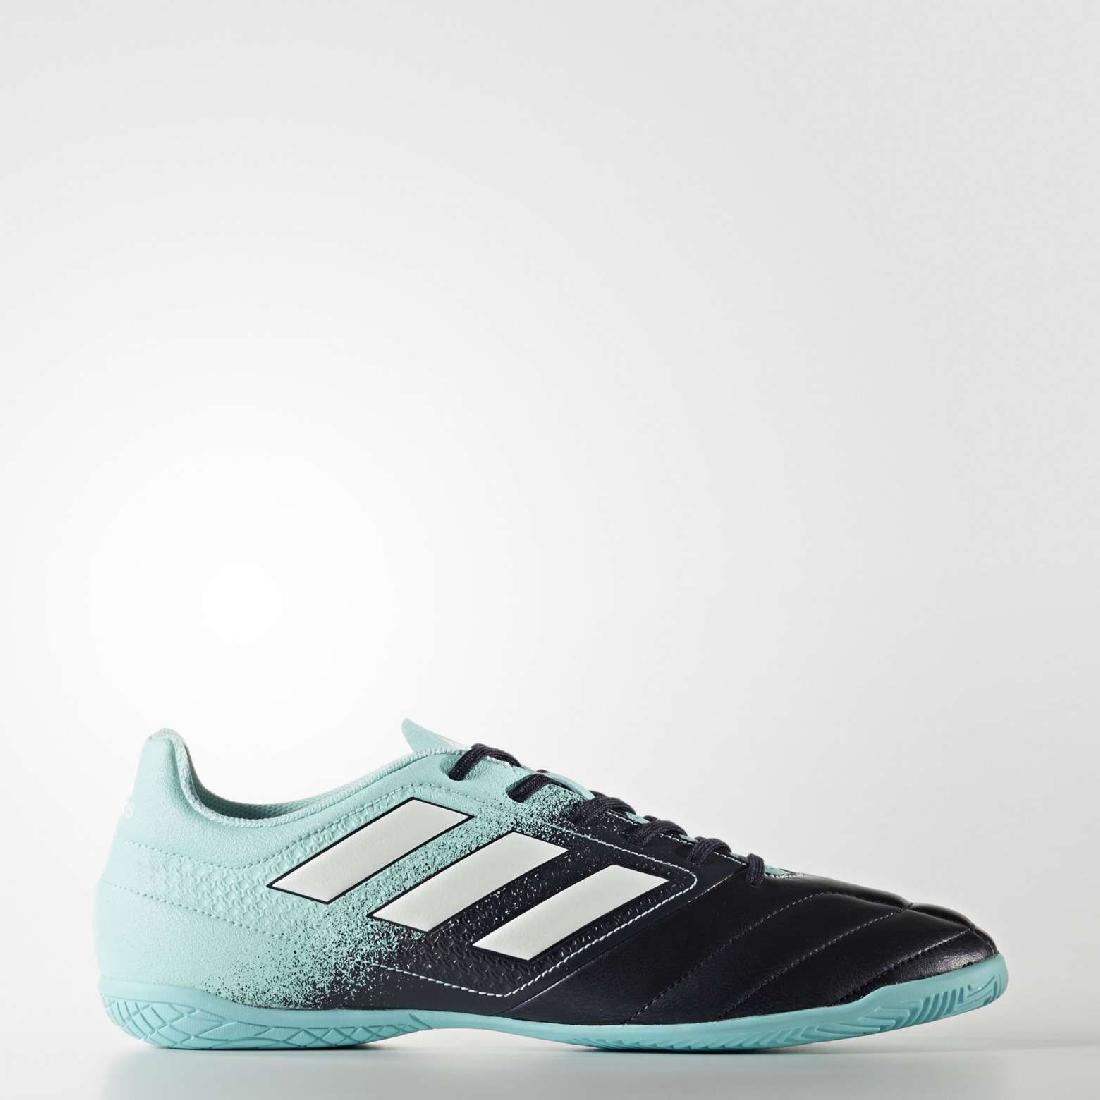  .  / ADIDAS ACE 17.4 IN S77102    